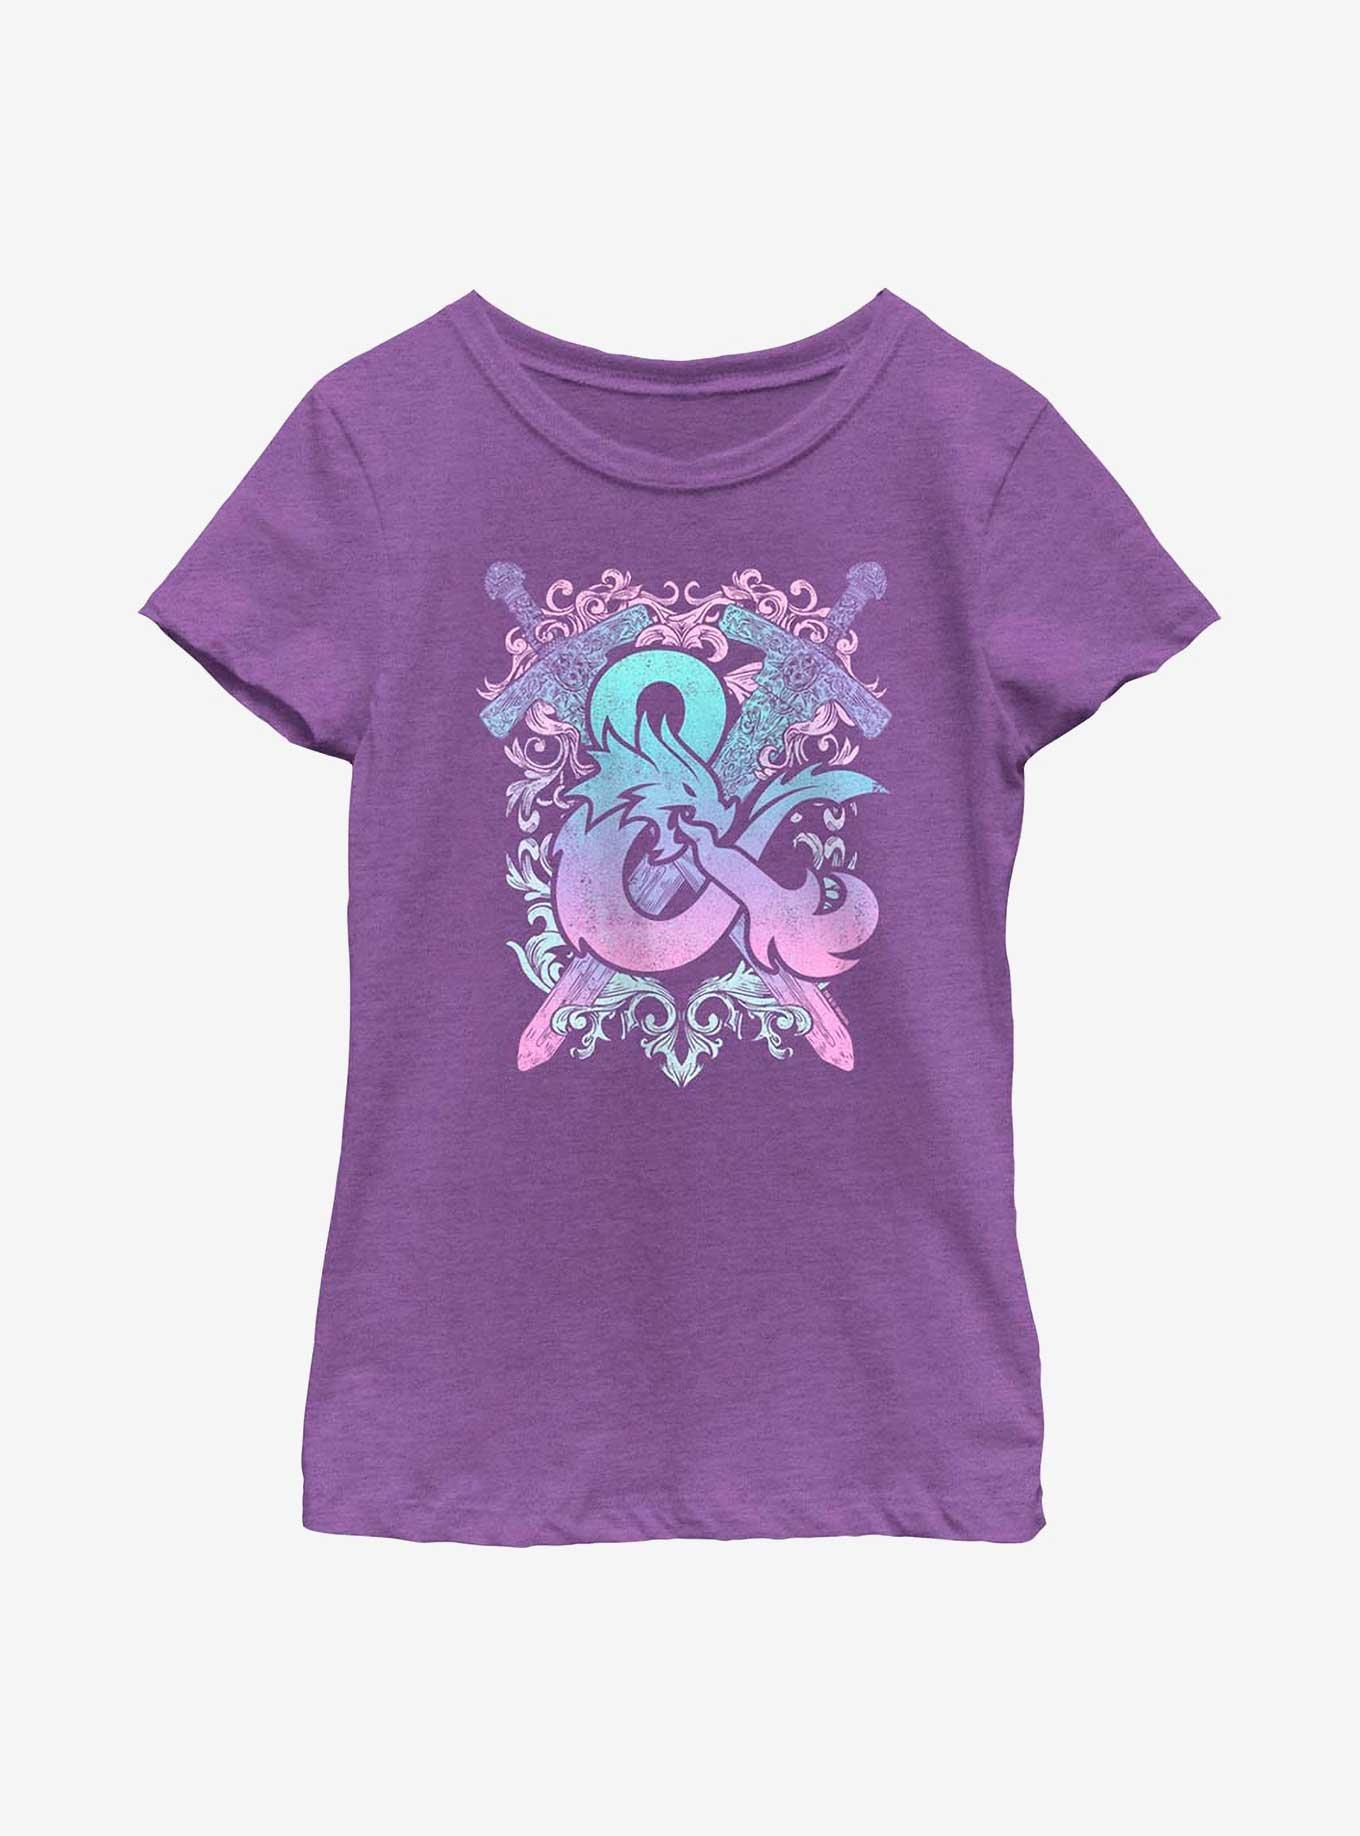 Dungeons & Dragons Pastel Ampersand Youth Girls T-Shirt, PURPLE BERRY, hi-res